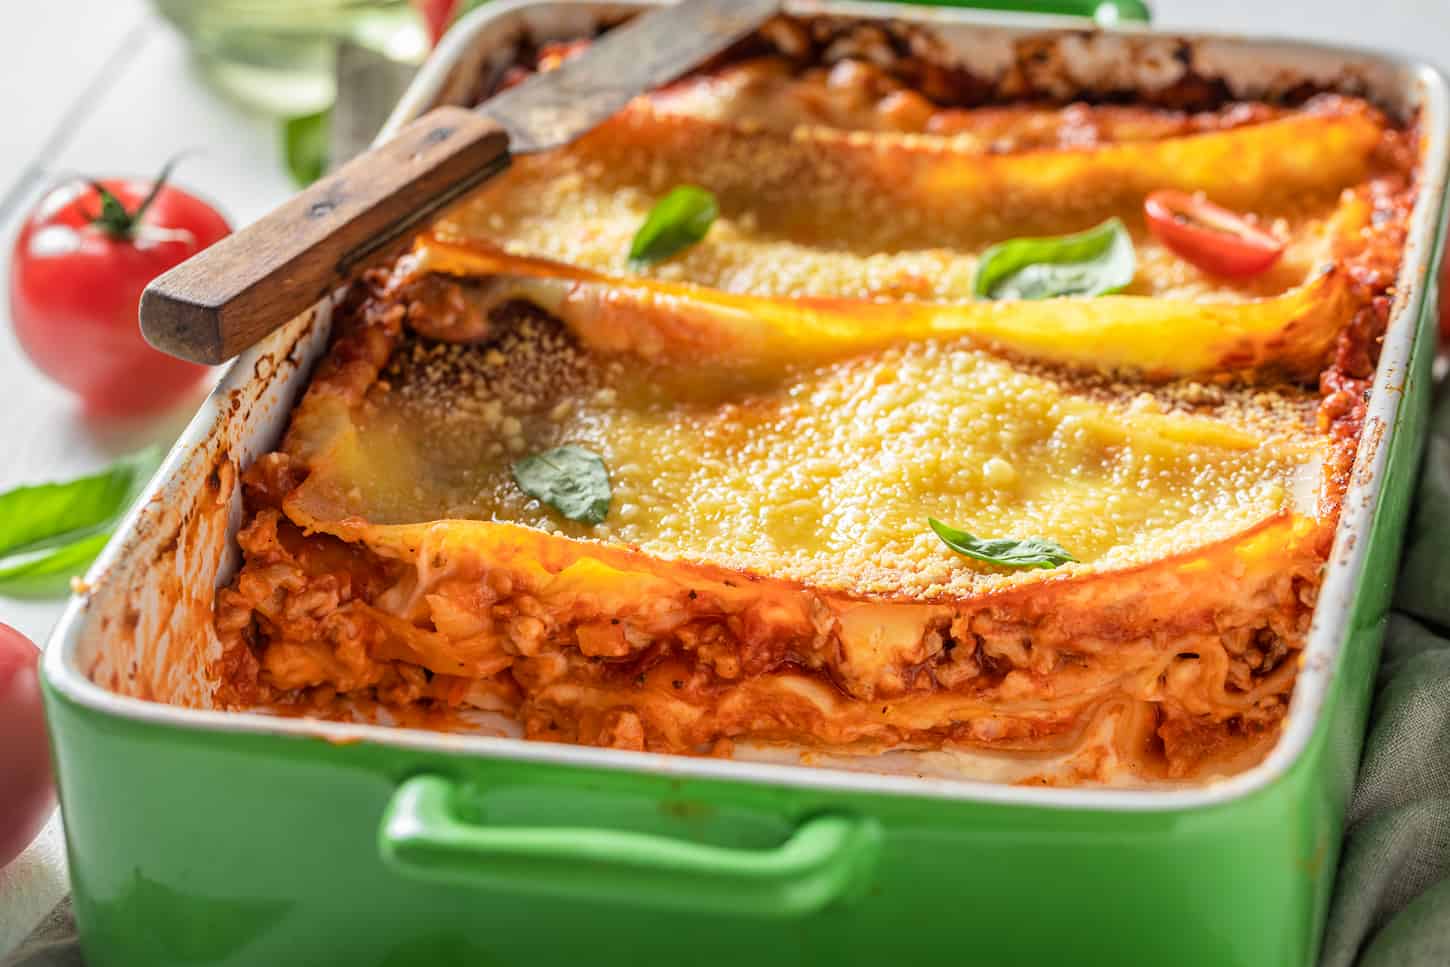 An image of Spicy lasagna baked in a casserole with cheese on a green tray.